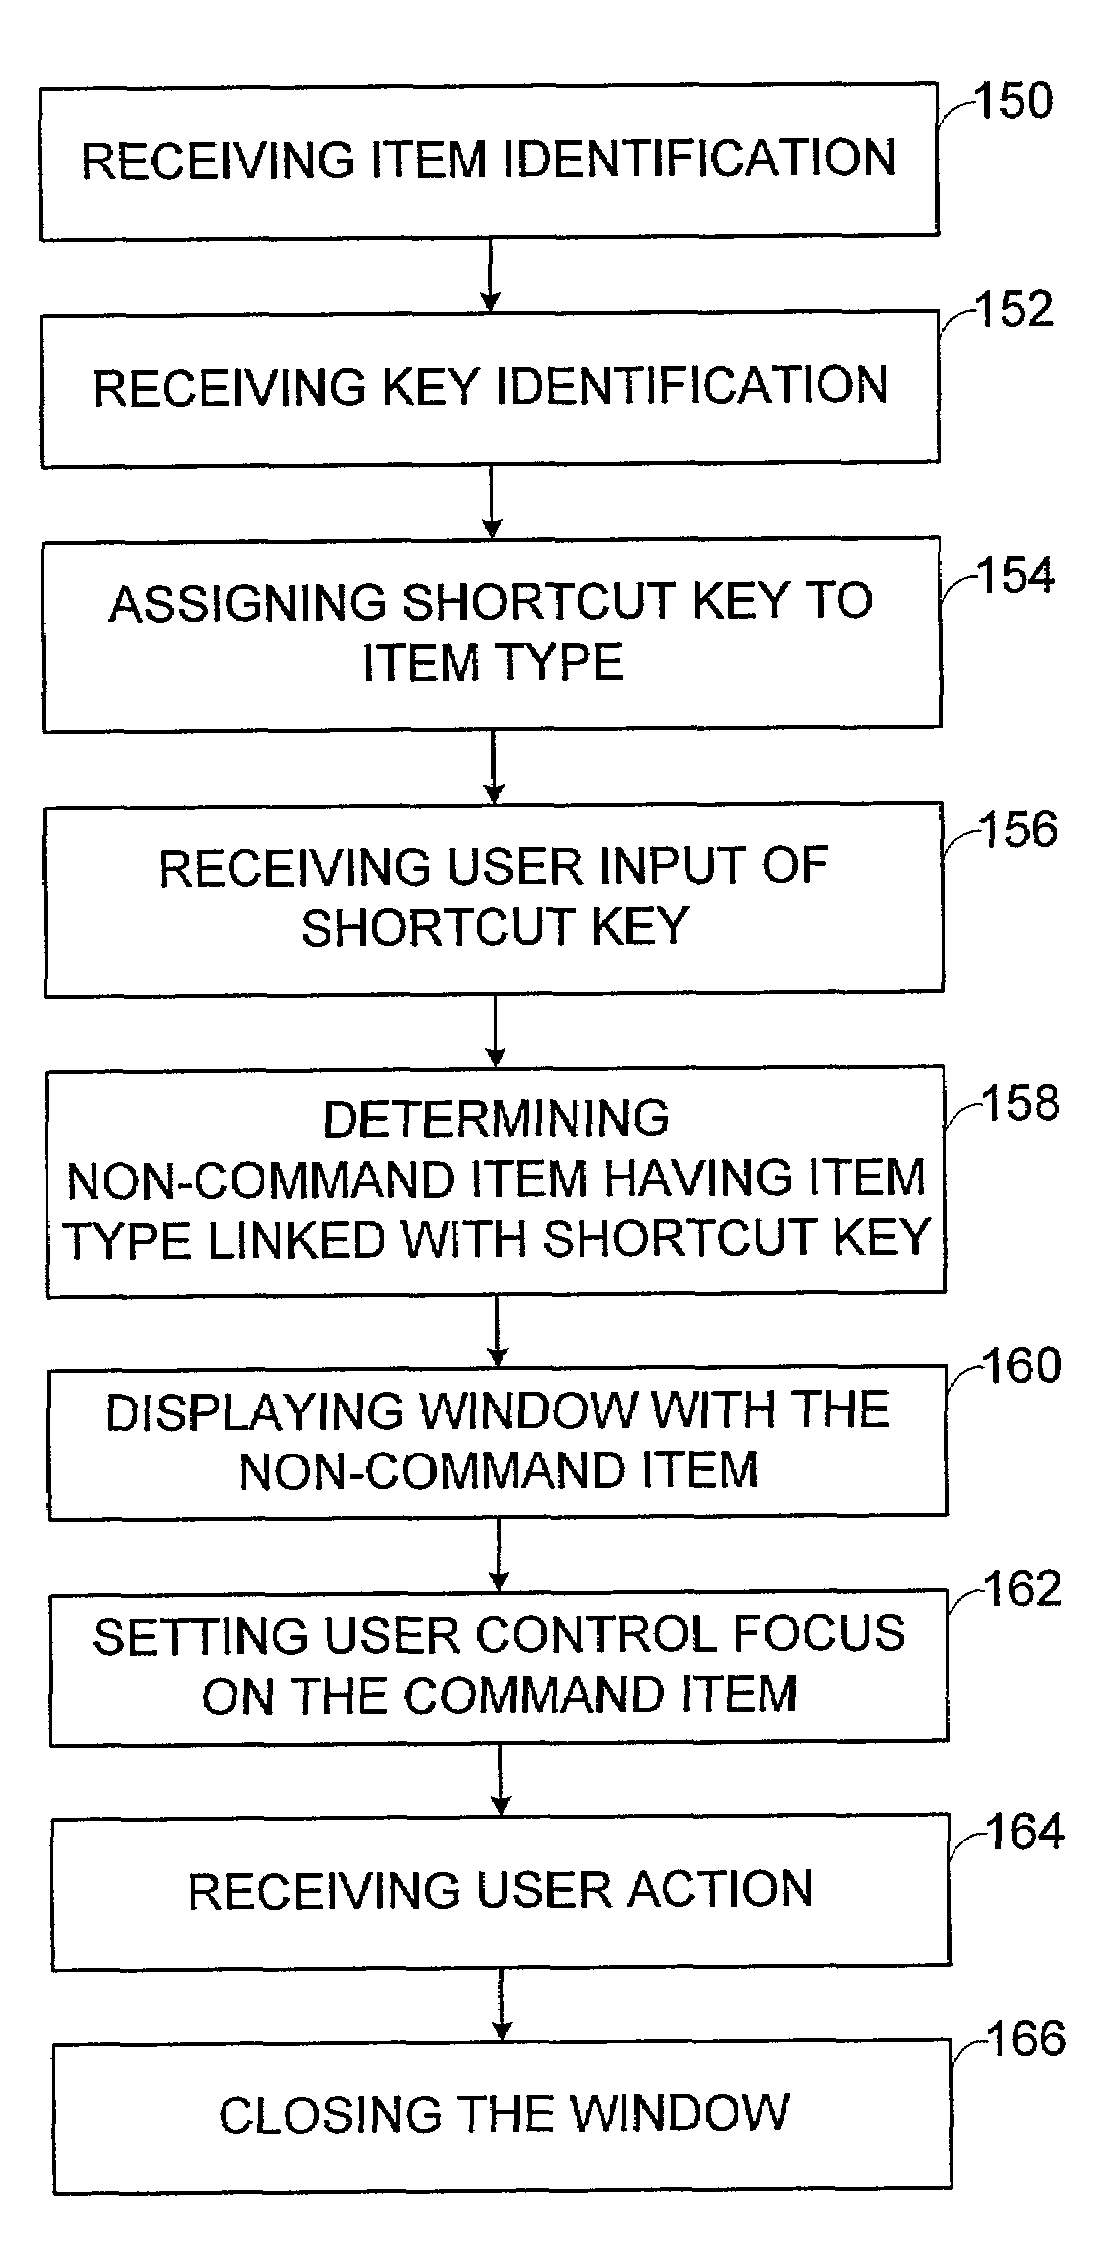 Shortcut key manager and method for managing shortcut key assignment